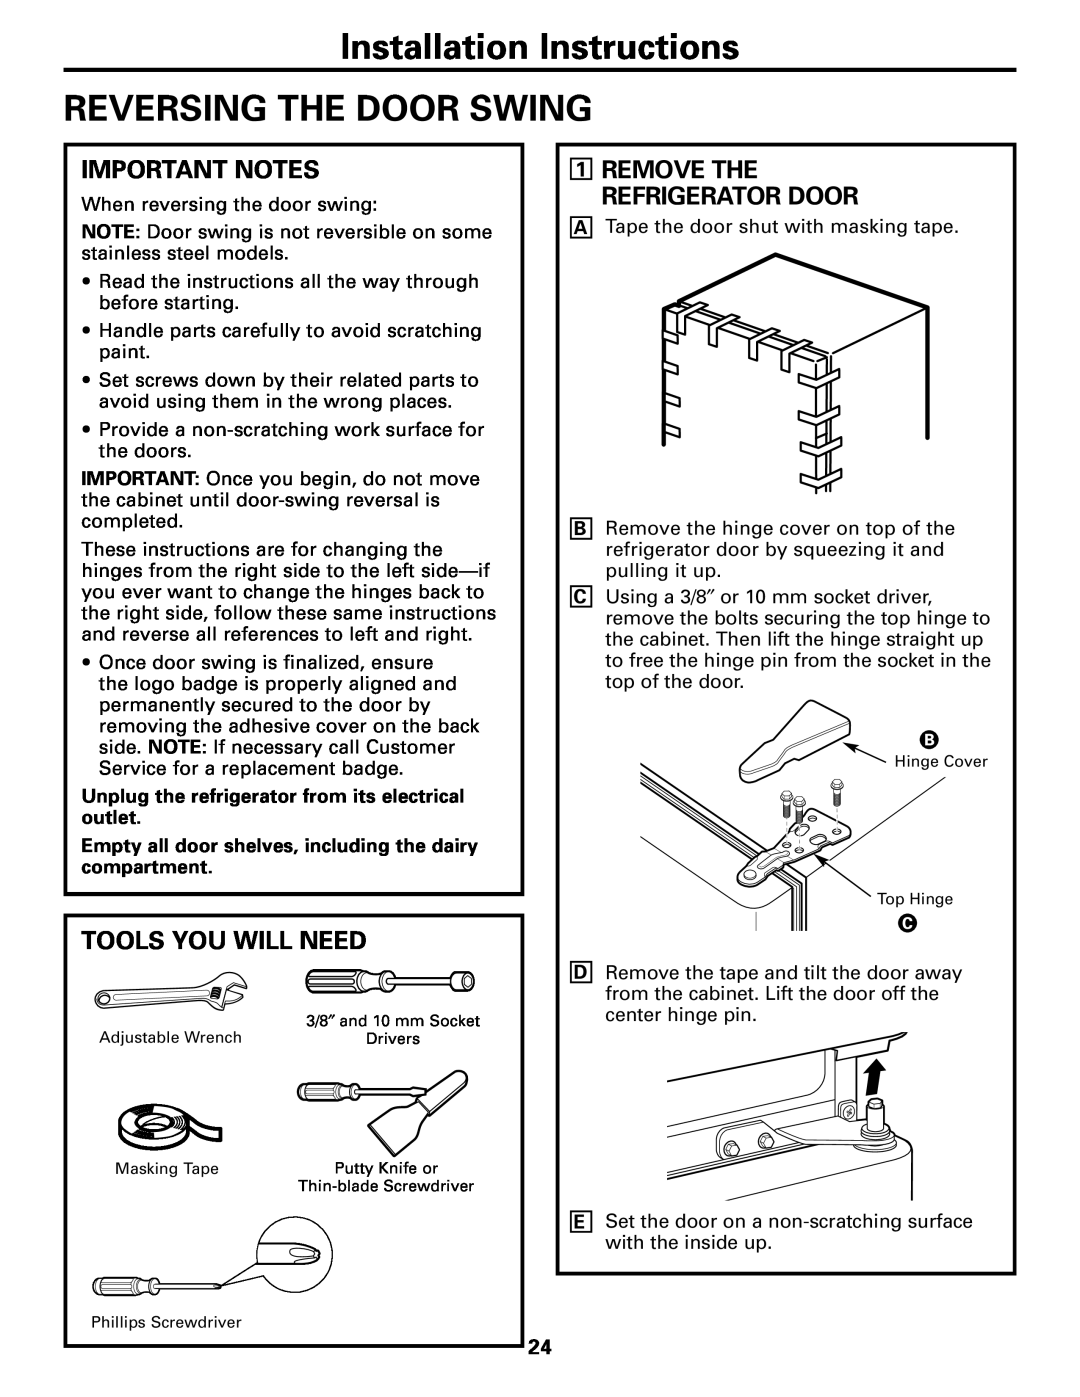 GE Monogram 22, 20 Installation Instructions REVERSING THE DOOR SWING, Important Notes, Tools You Will Need 